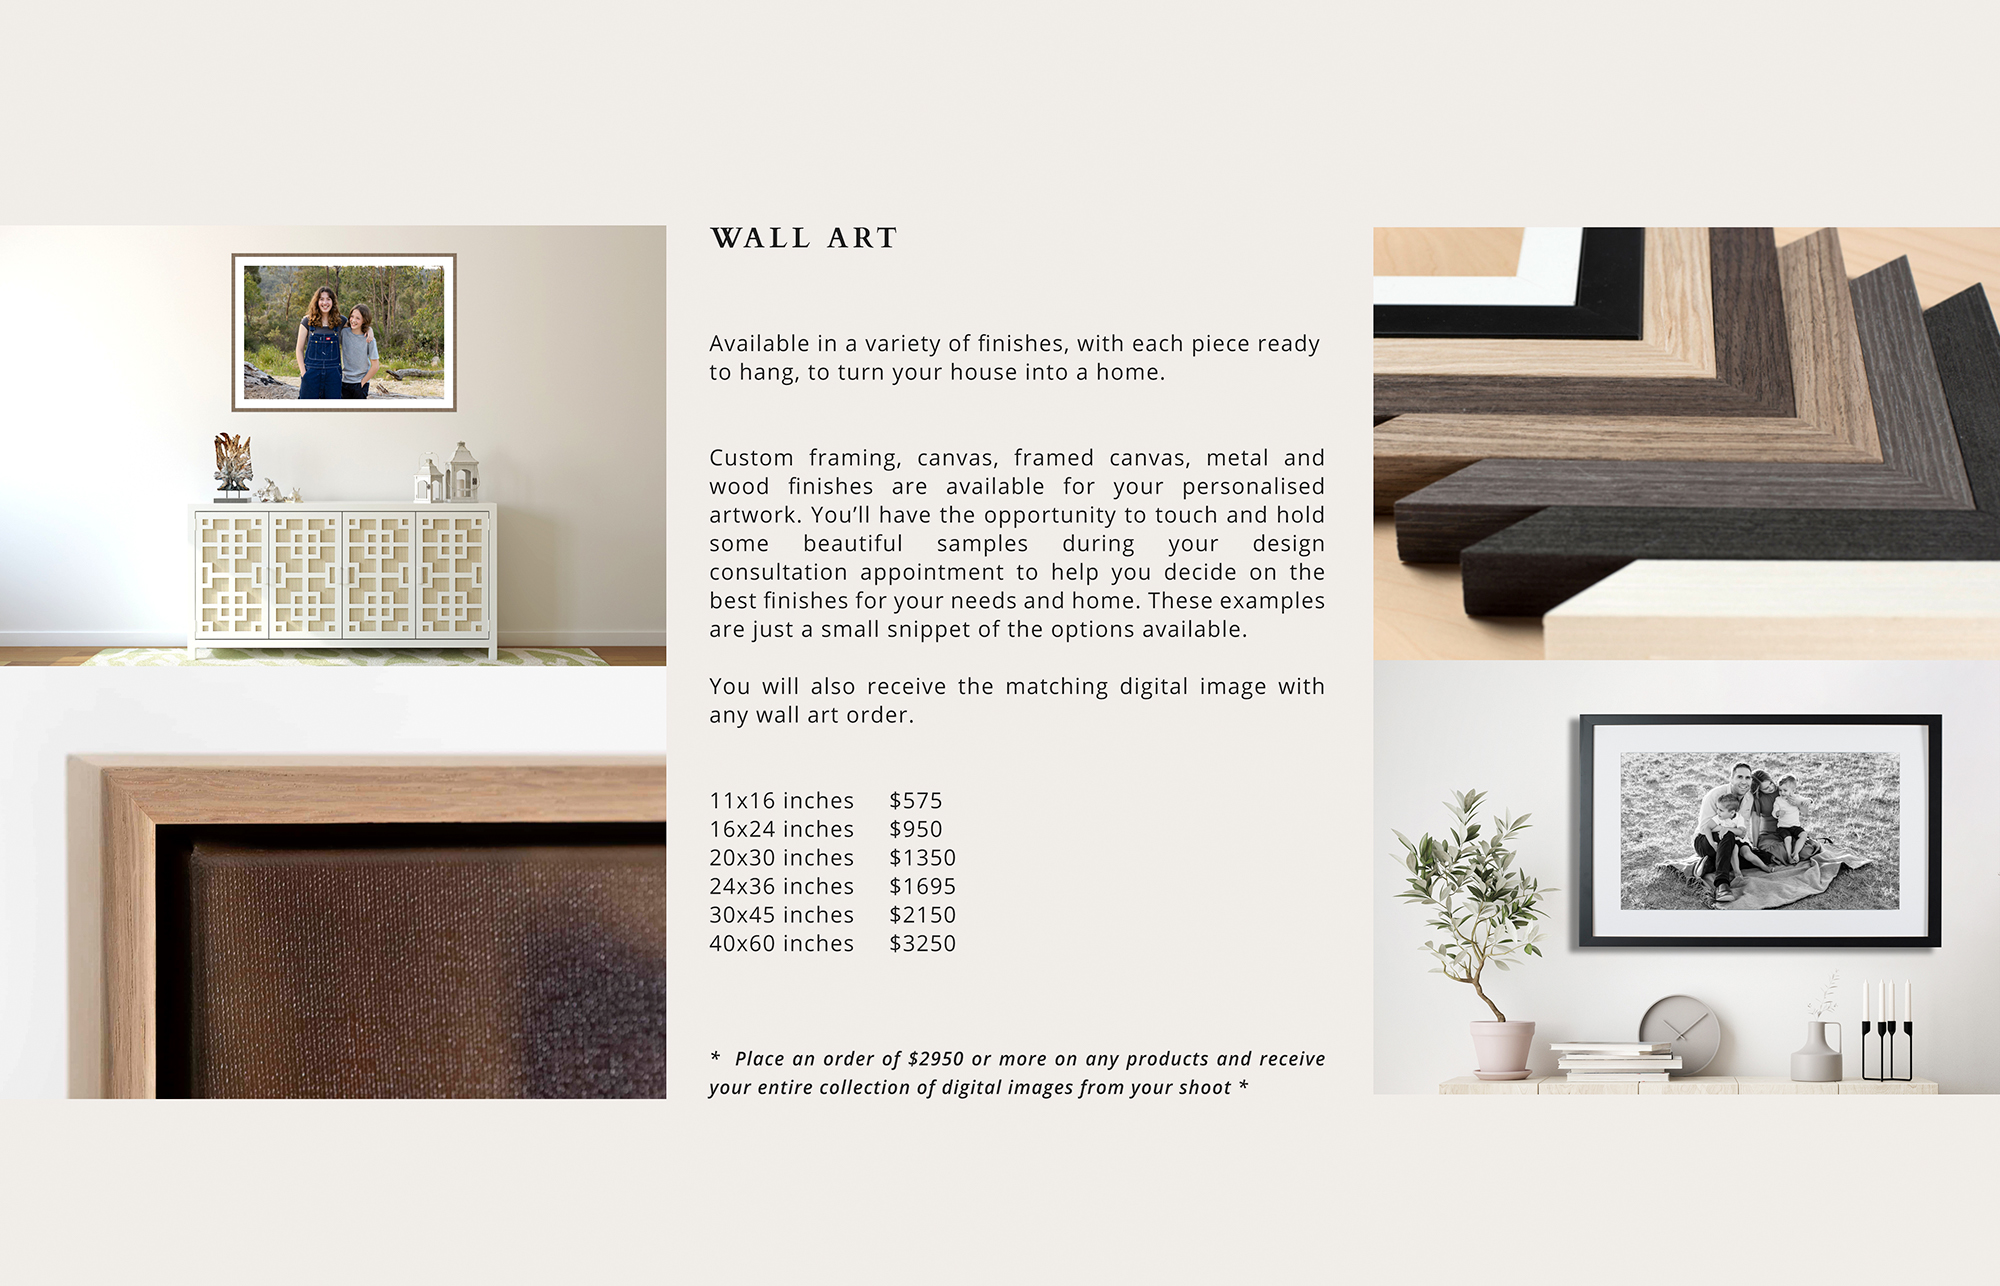 05 - WALL ART PRICING PAGE